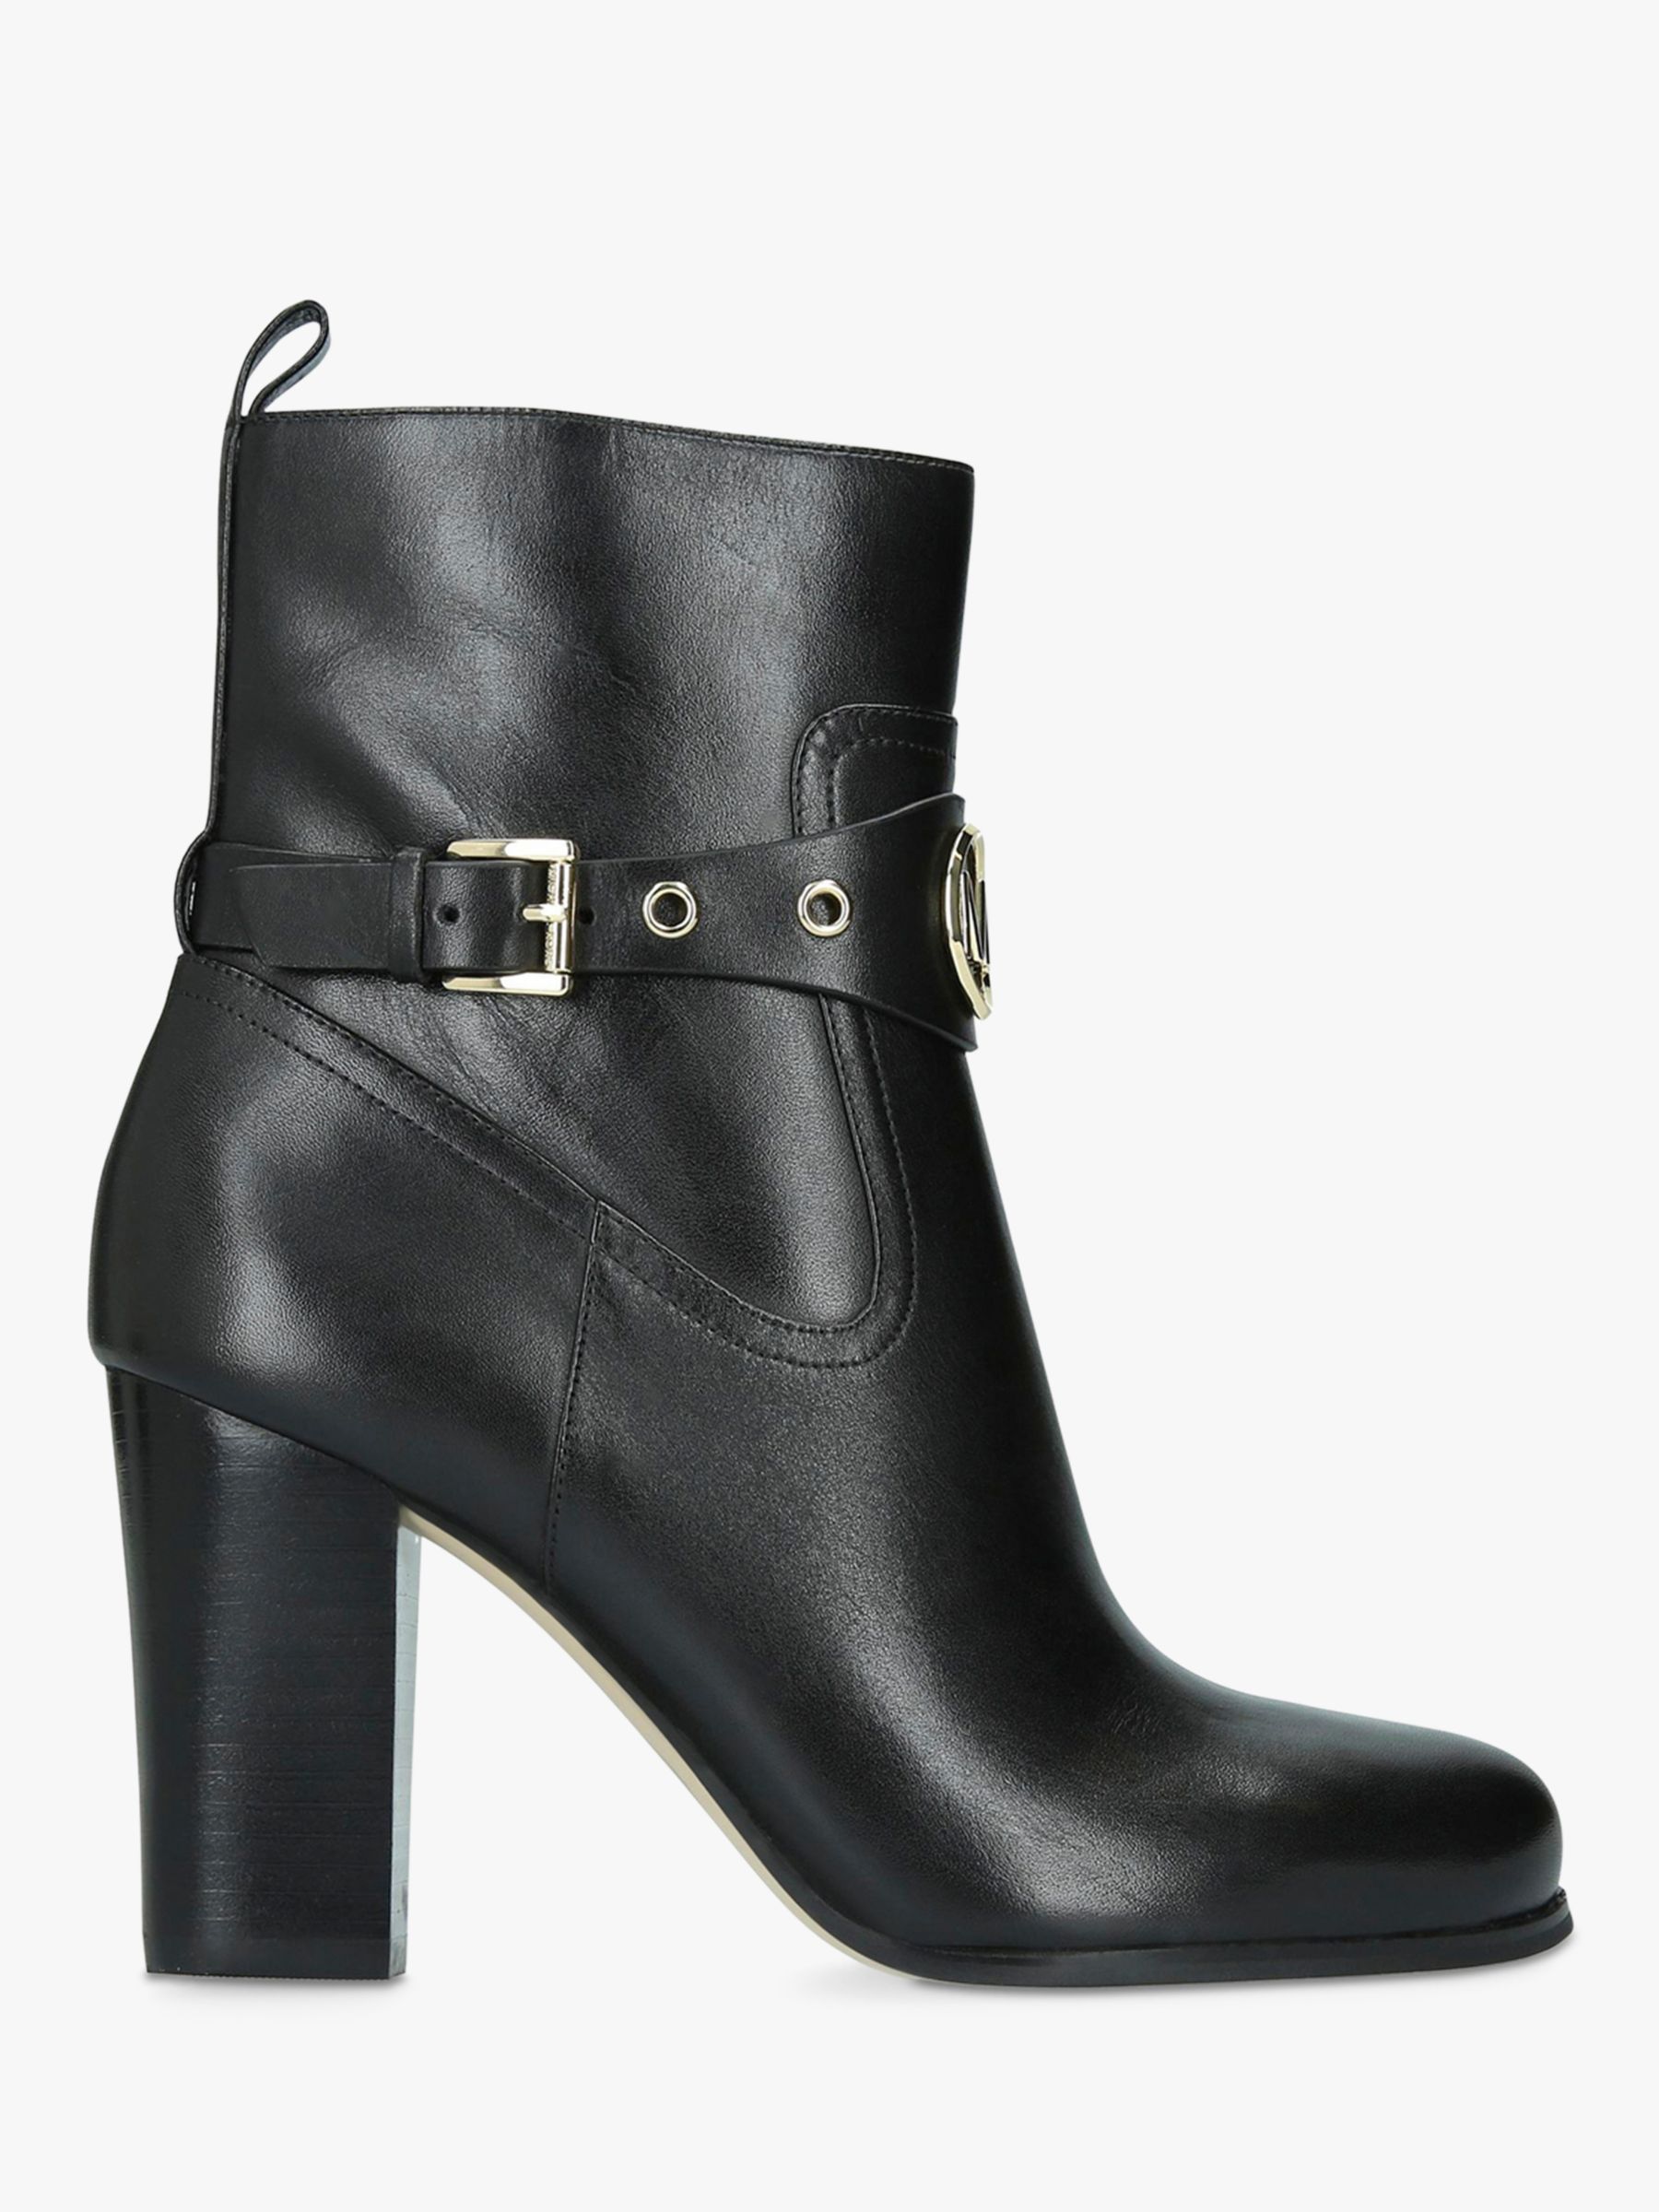 MICHAEL Michael Kors Heather Block Heel Ankle Boots, Black Leather at ...